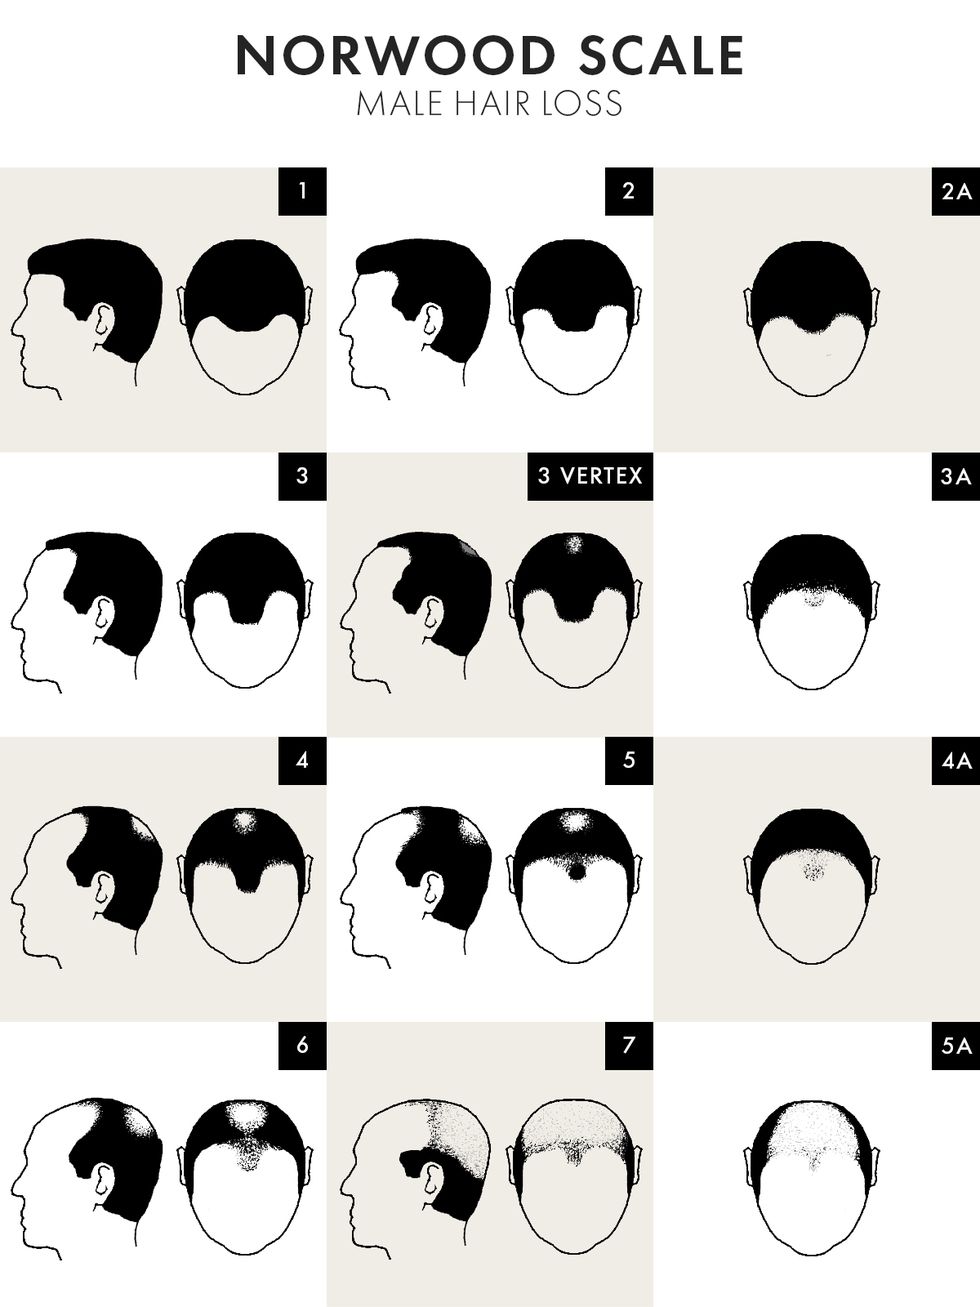 norwood scale of male hair loss